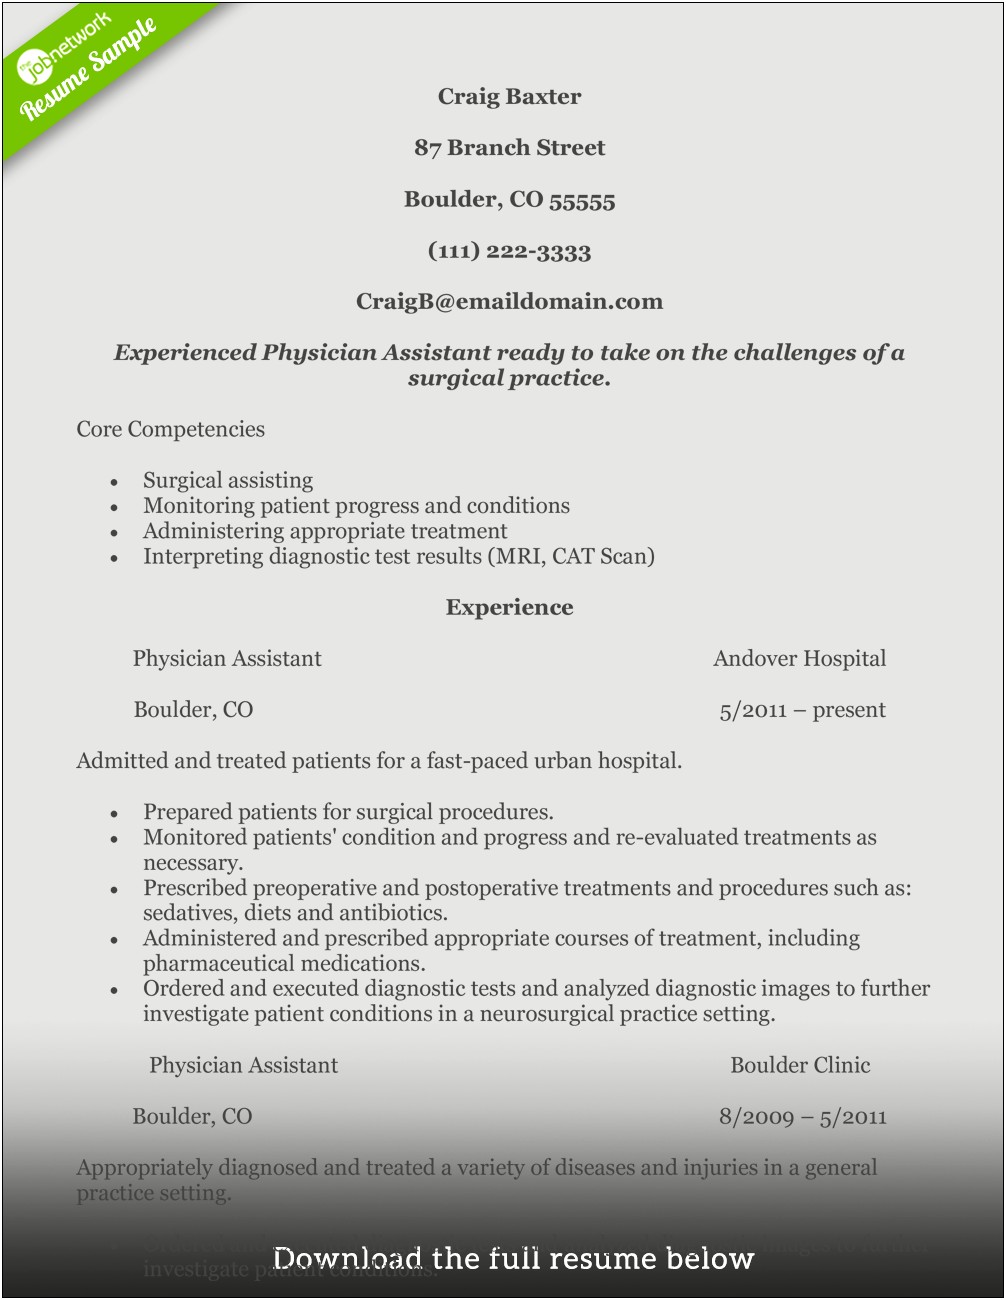 New Grad Physician Assistant Resume Objective